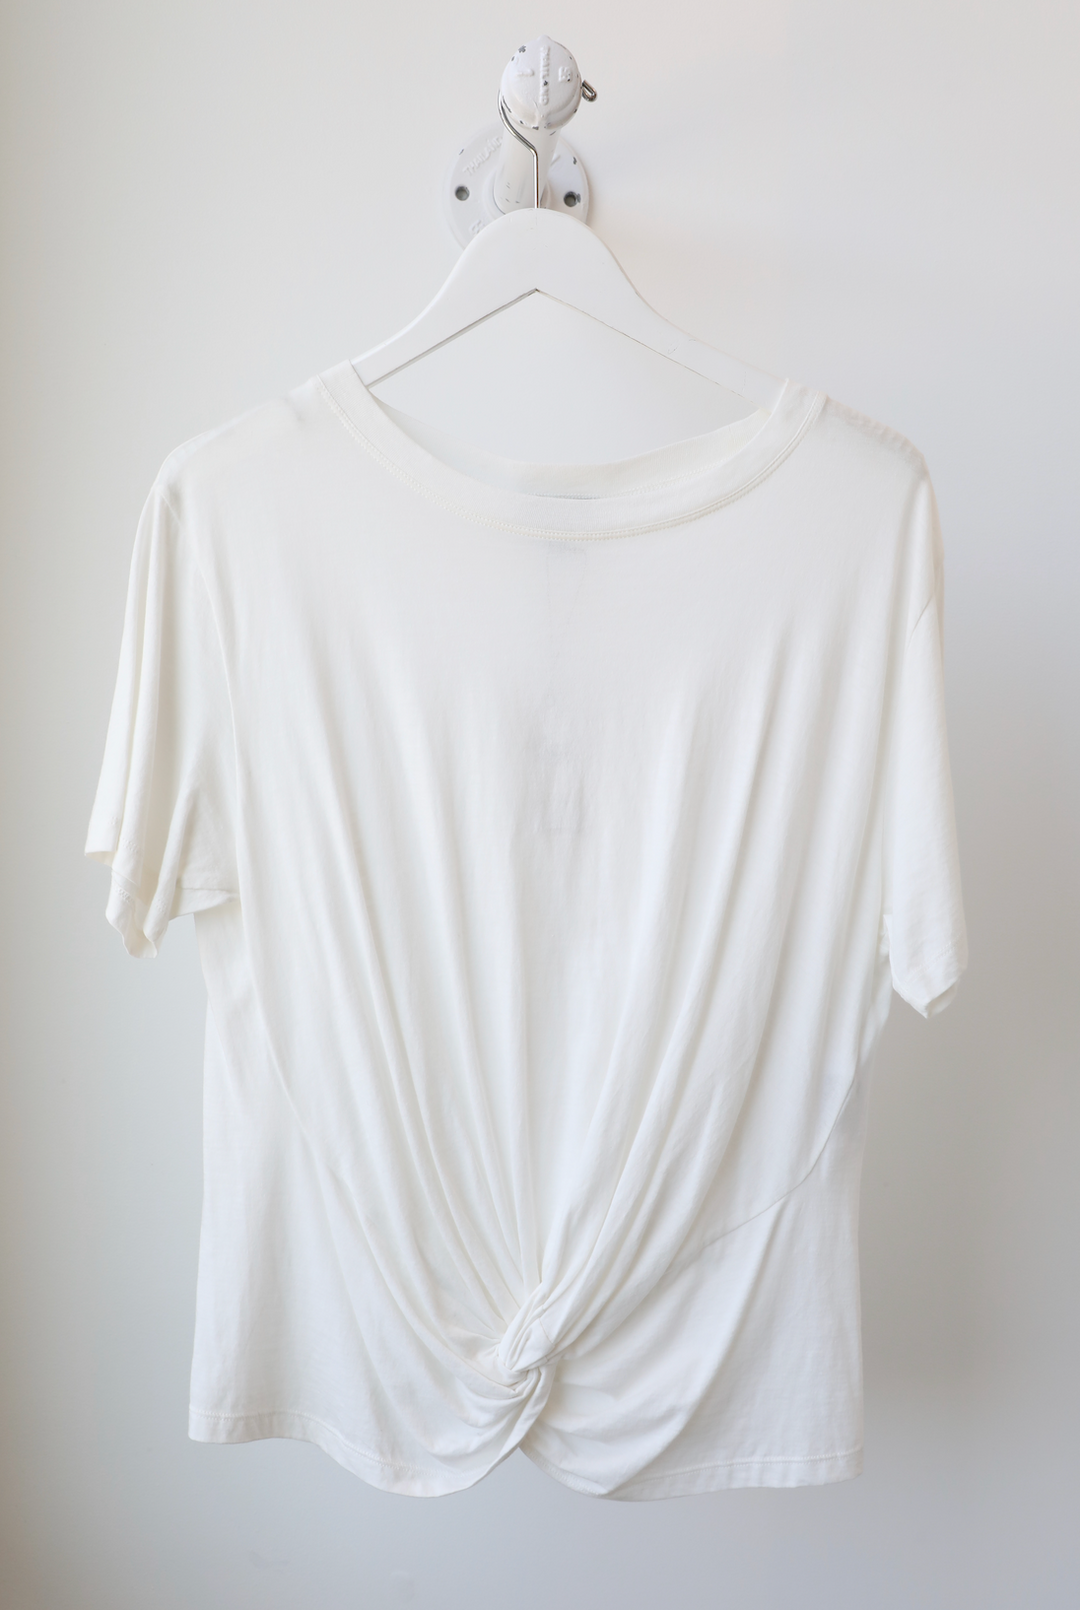 7SVN - Knotted Front Tee in White